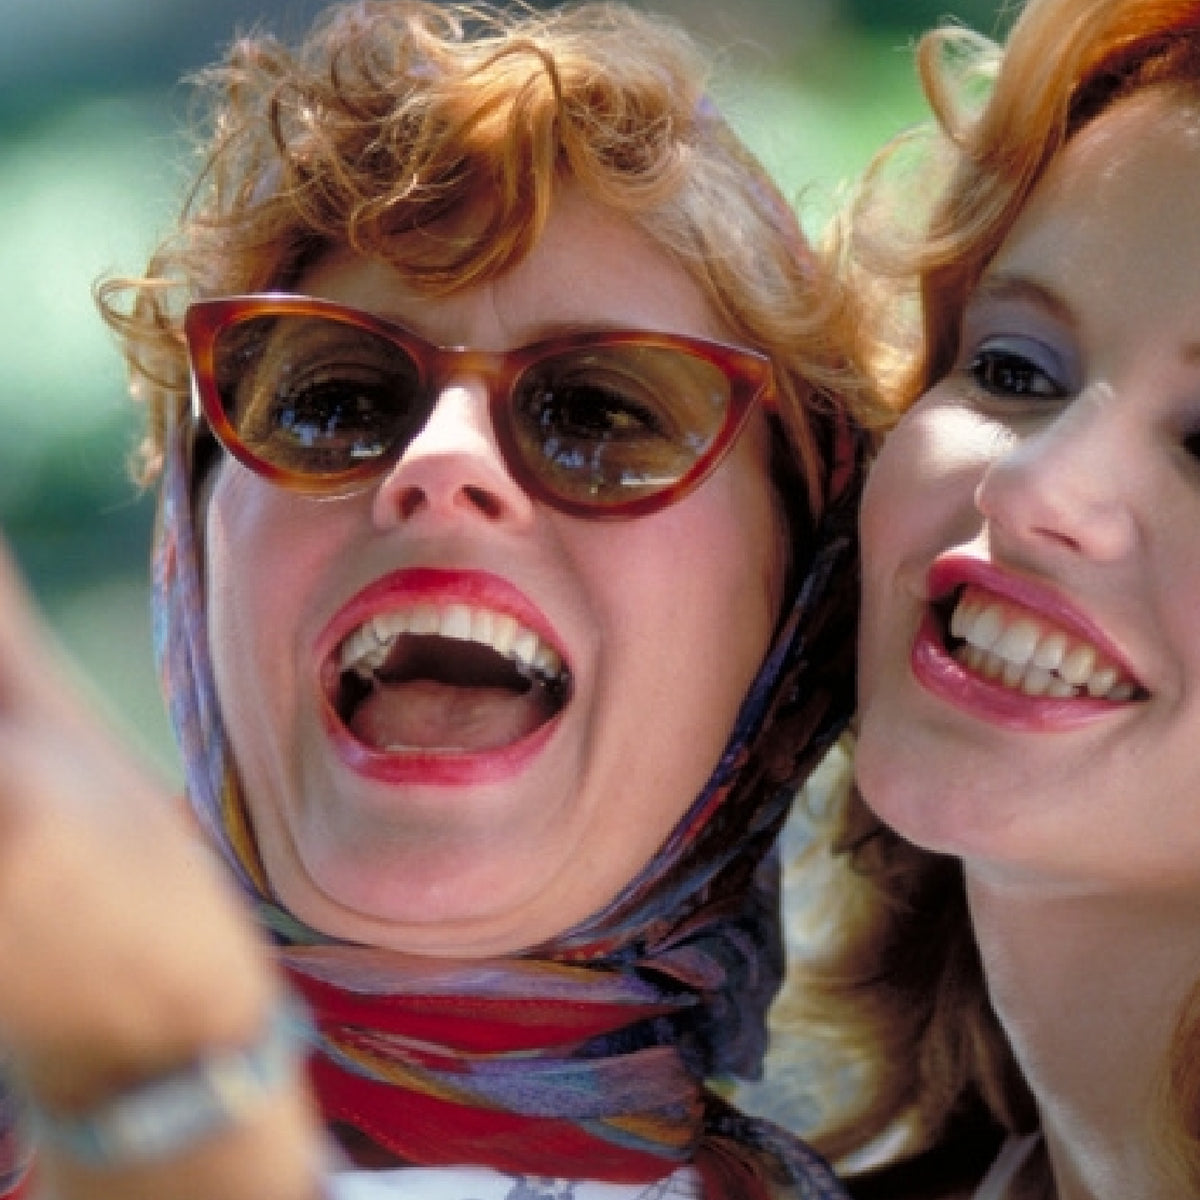 Thelma and Louise style and fashion highlights